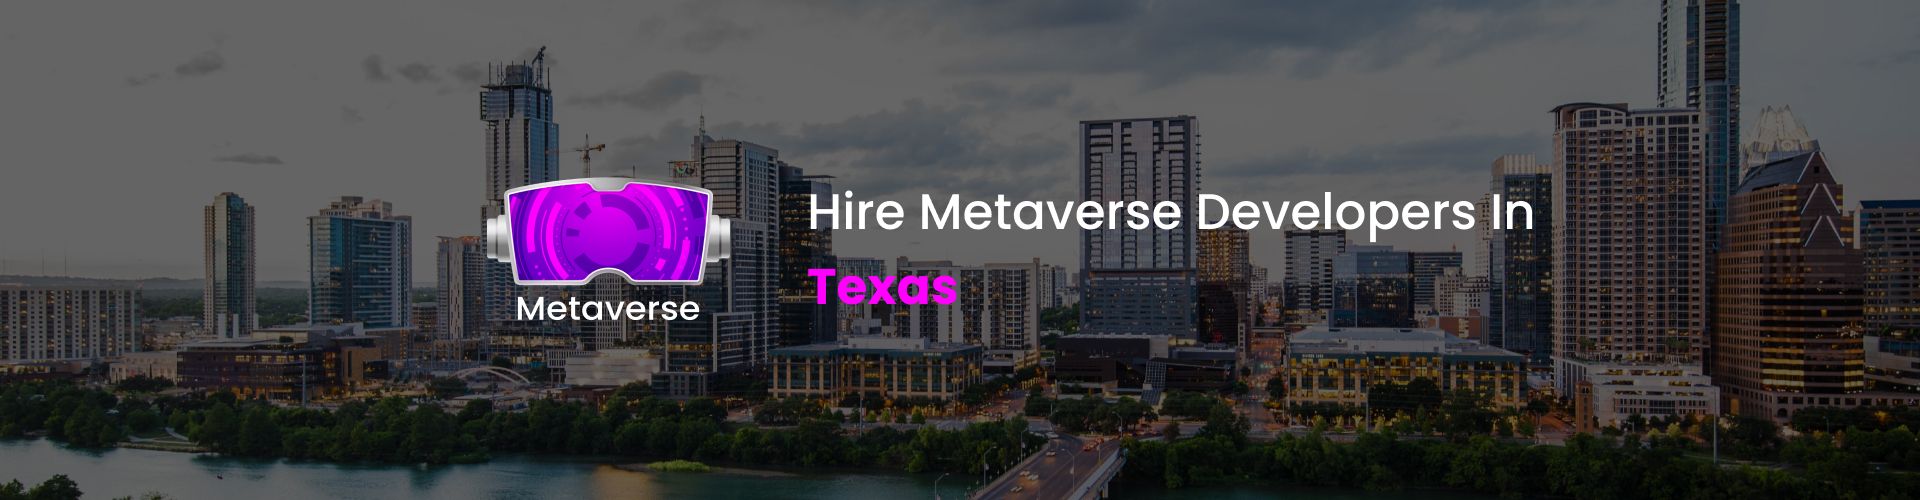 hire metaverse developers in texas